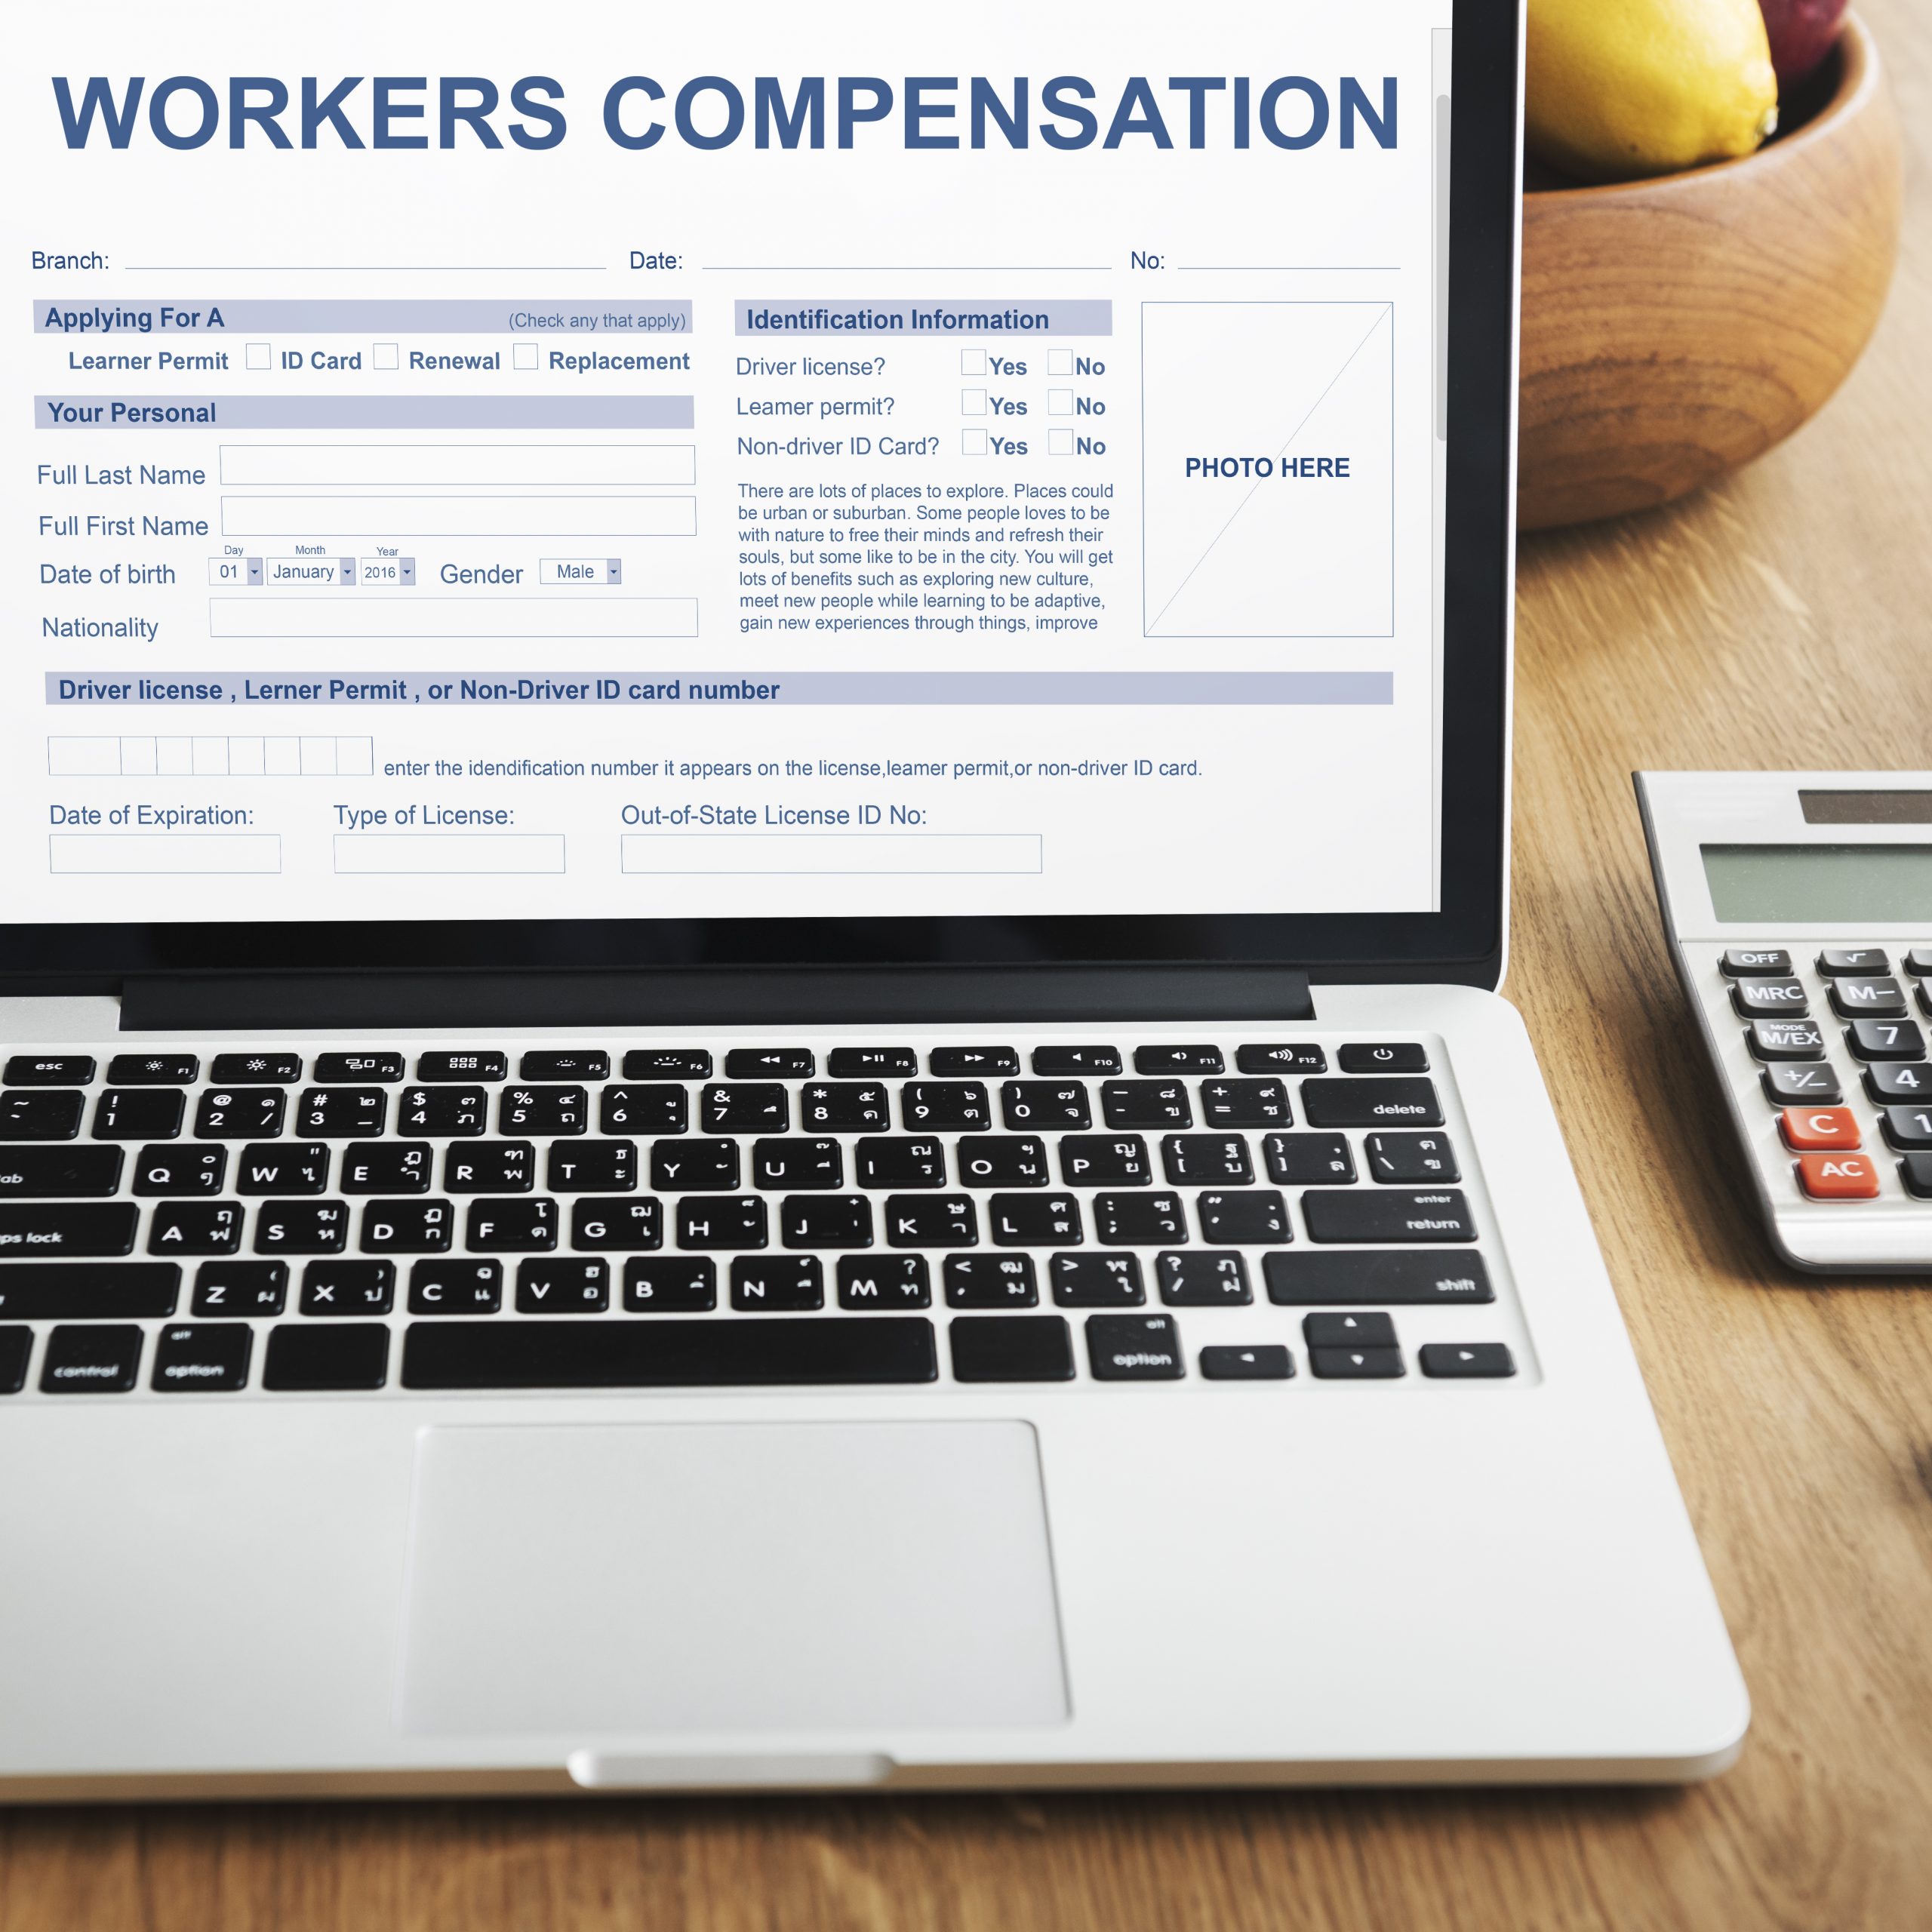 PEO solutions help you with workers compensation